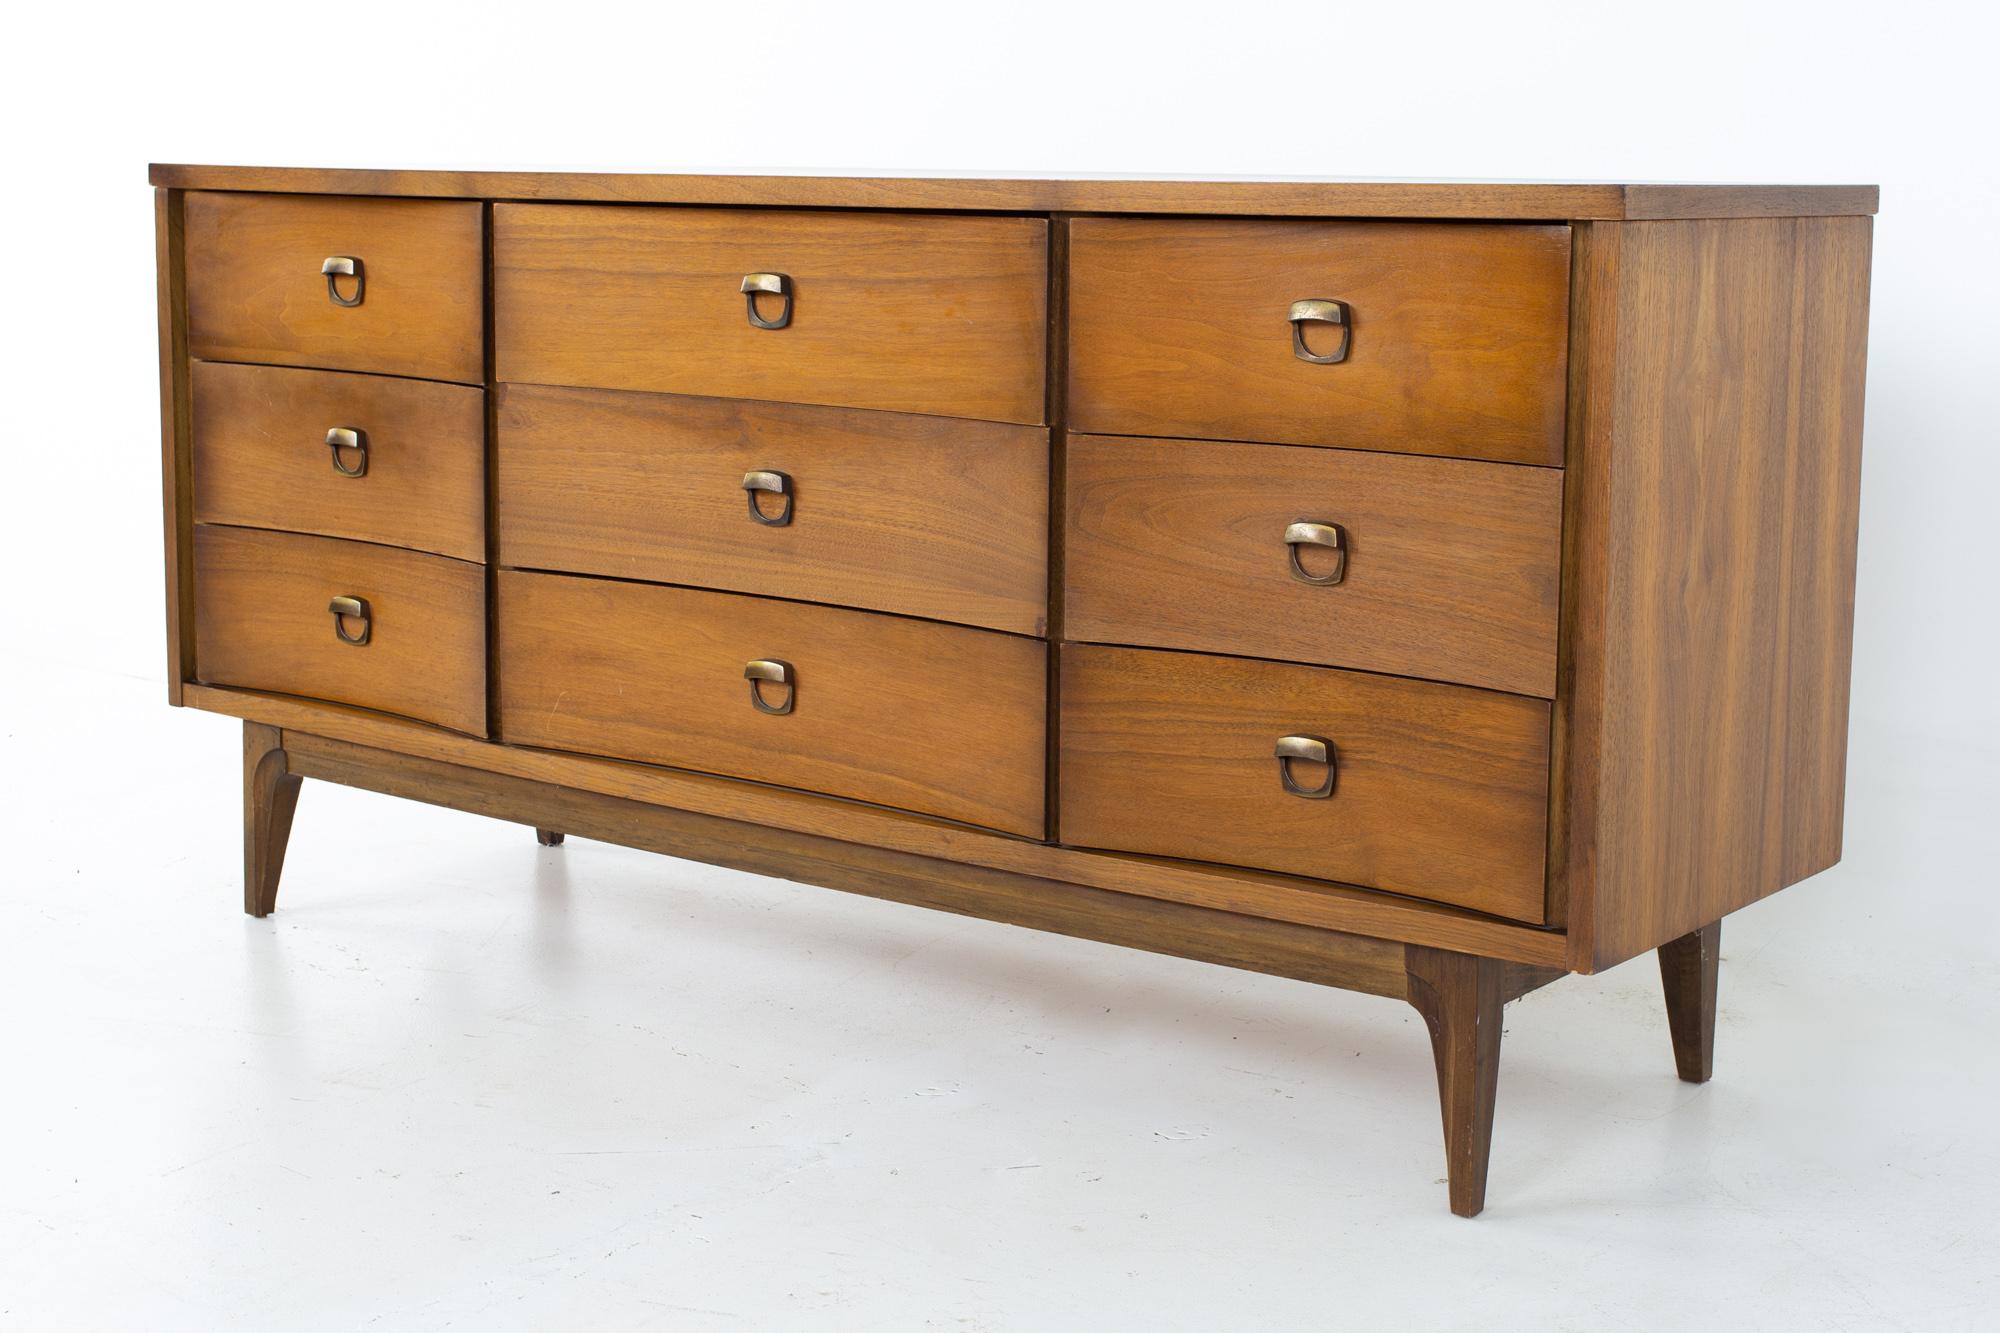 Johnson Carper Mid Century lowboy dresser
Dresser measures: 64 wide x 18 deep x 30 inches high

All pieces of furniture can be had in what we call restored vintage condition. That means the piece is restored upon purchase so it’s free of